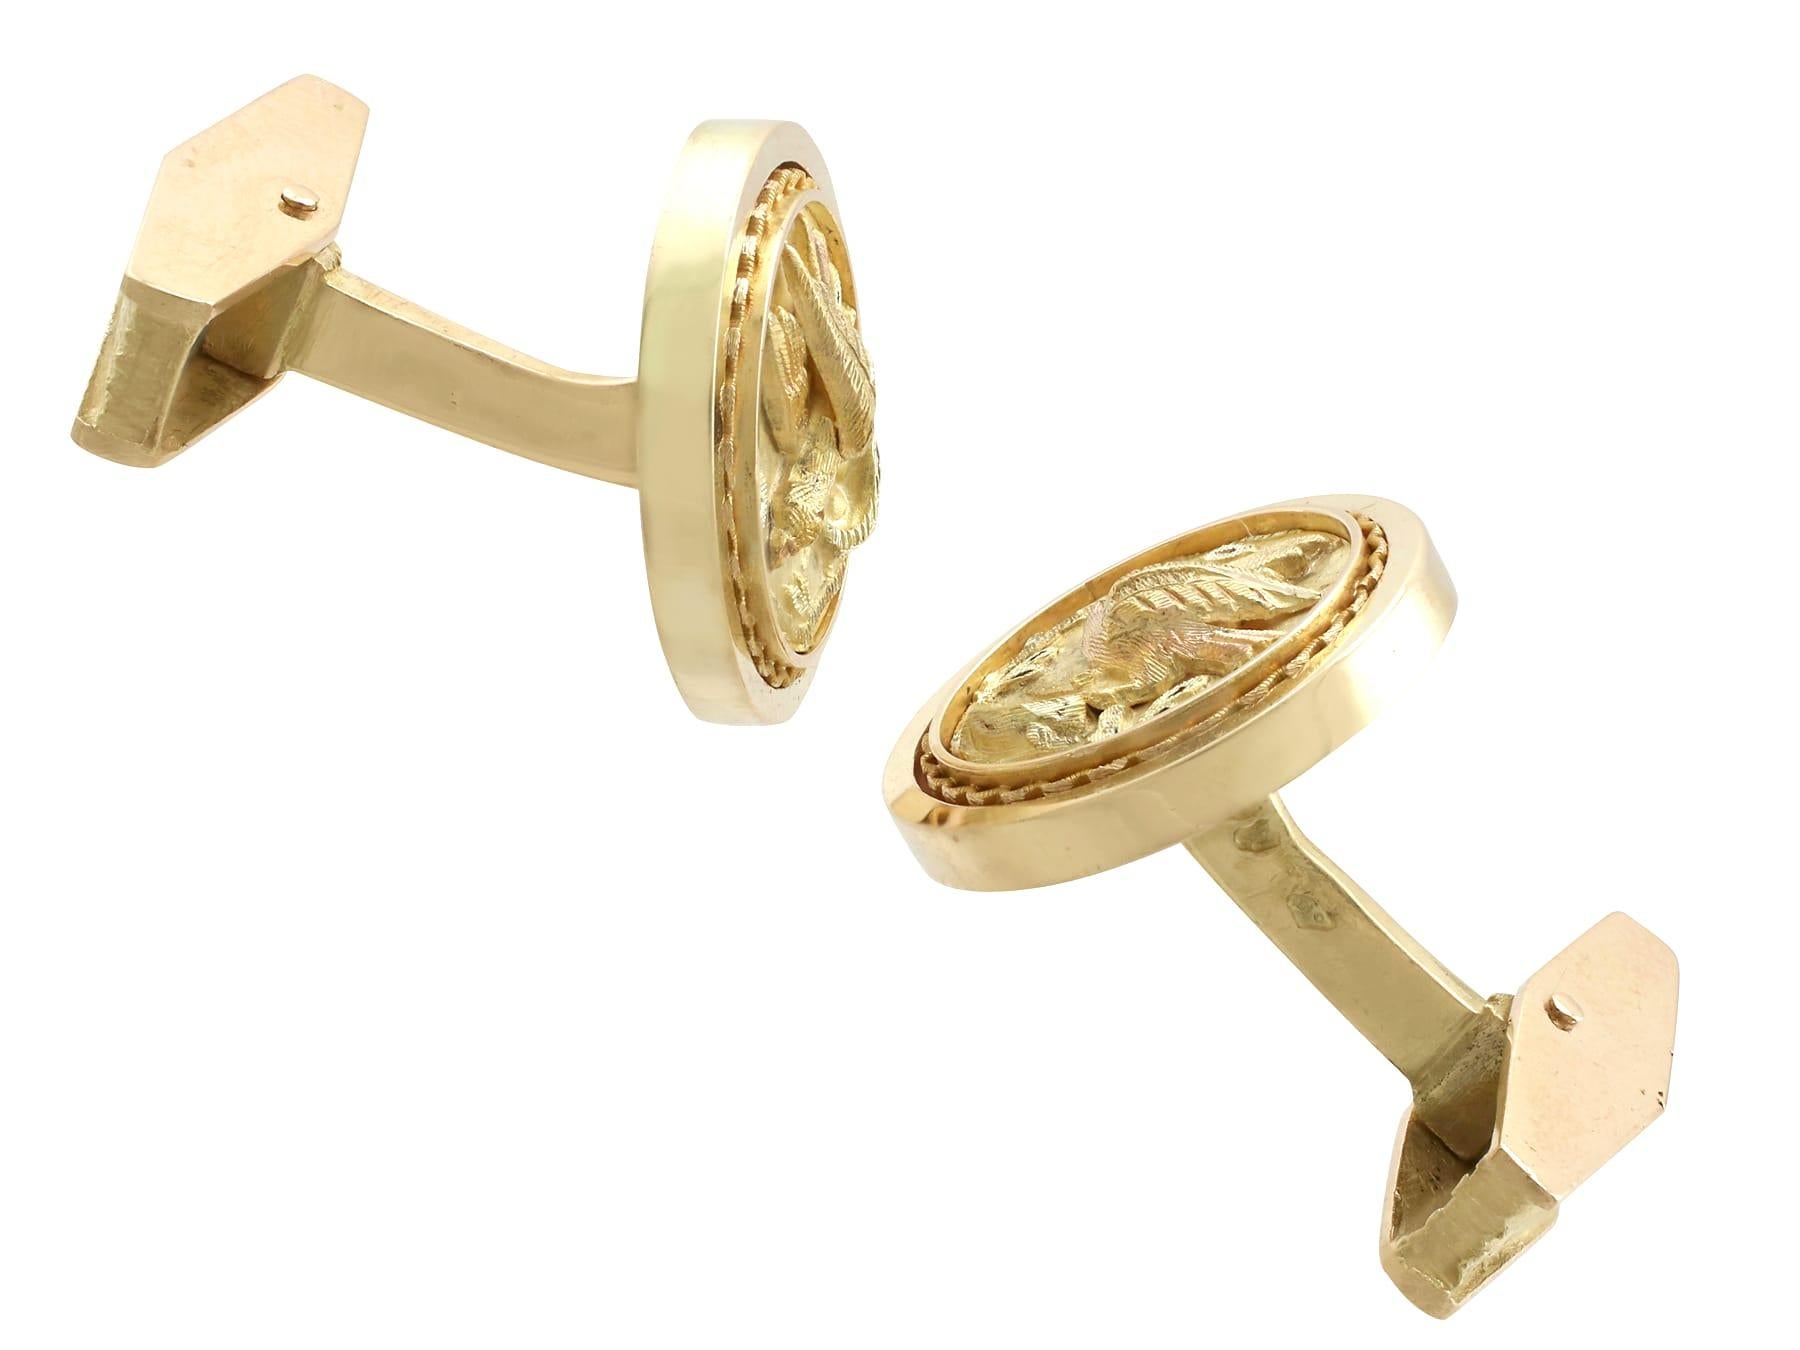 Vintage French 1950s Yellow Gold Bird Cufflinks In Excellent Condition For Sale In Jesmond, Newcastle Upon Tyne